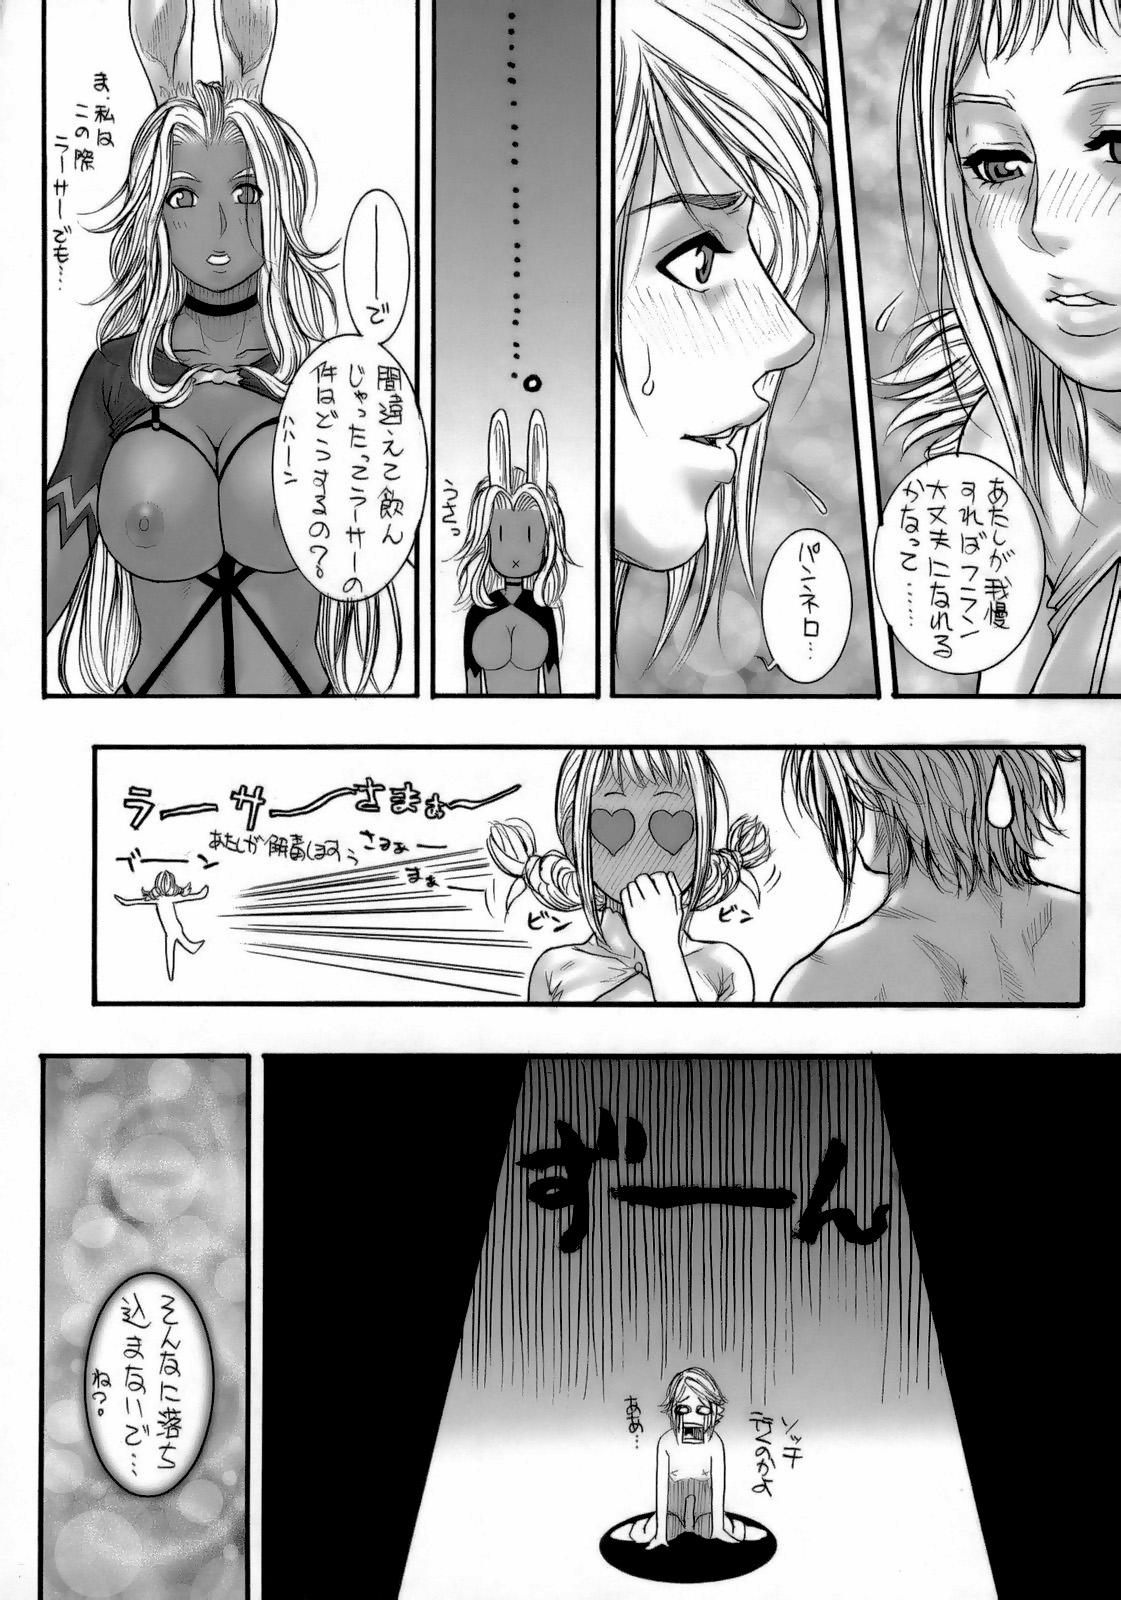 Hot Naked Girl FF Ane Ane - Final fantasy xii Final fantasy x-2 Sucking Dick - Page 7